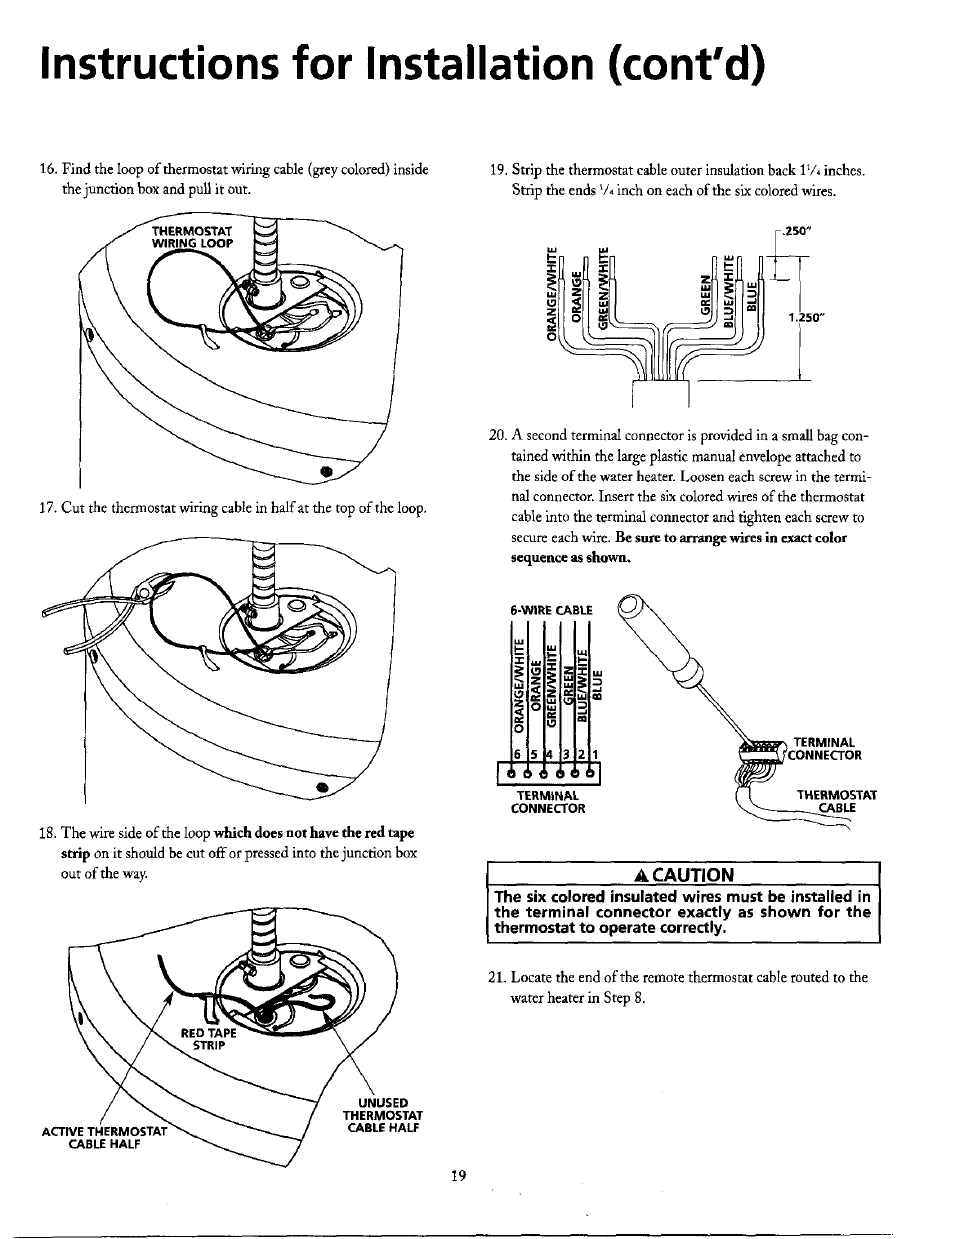 Instructions for installation (cont'd) | Maytag HE21250PC User Manual | Page 19 / 40